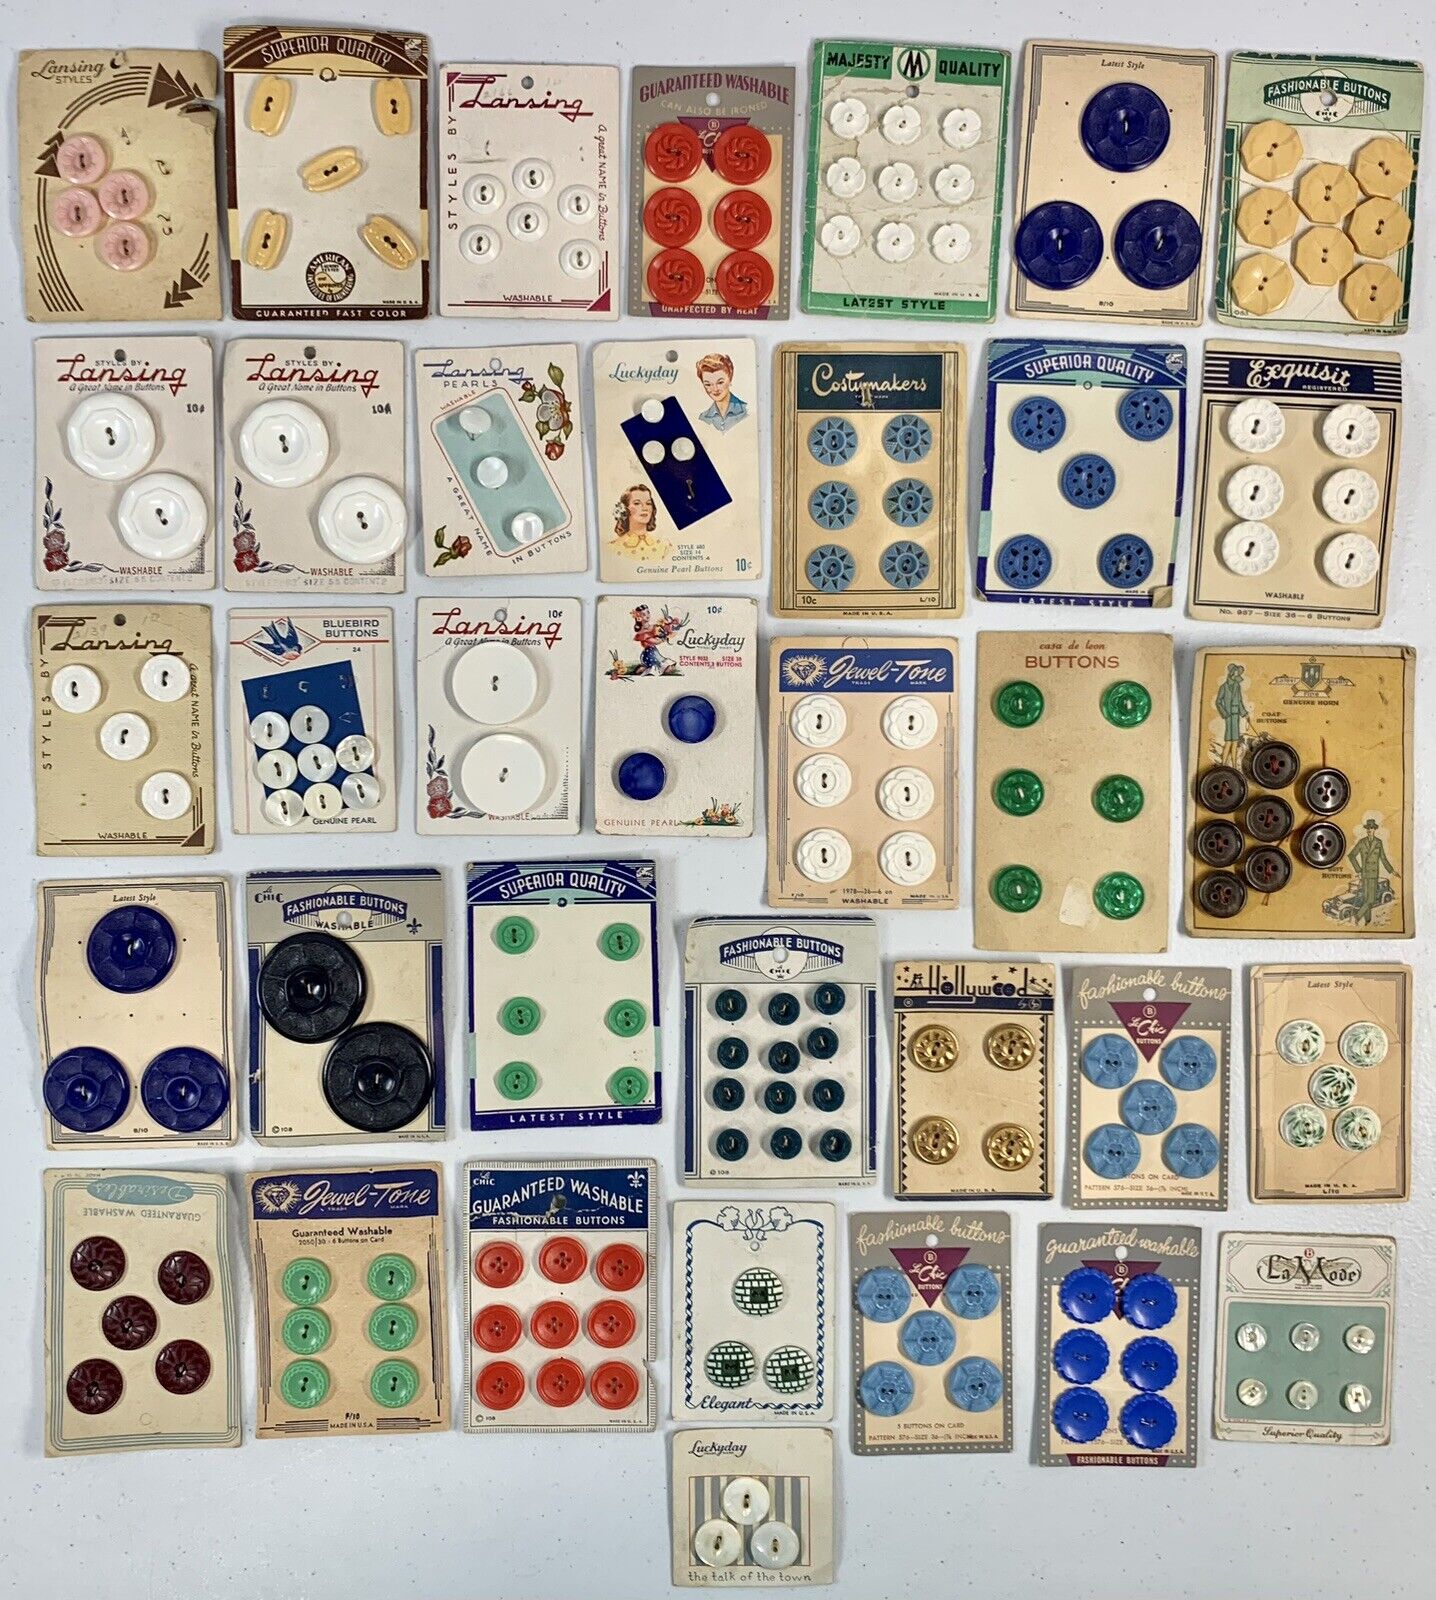 *NEW* Lot of 181 Vintage Antique Buttons Sewing Crafts Button Cards Jewel Tones